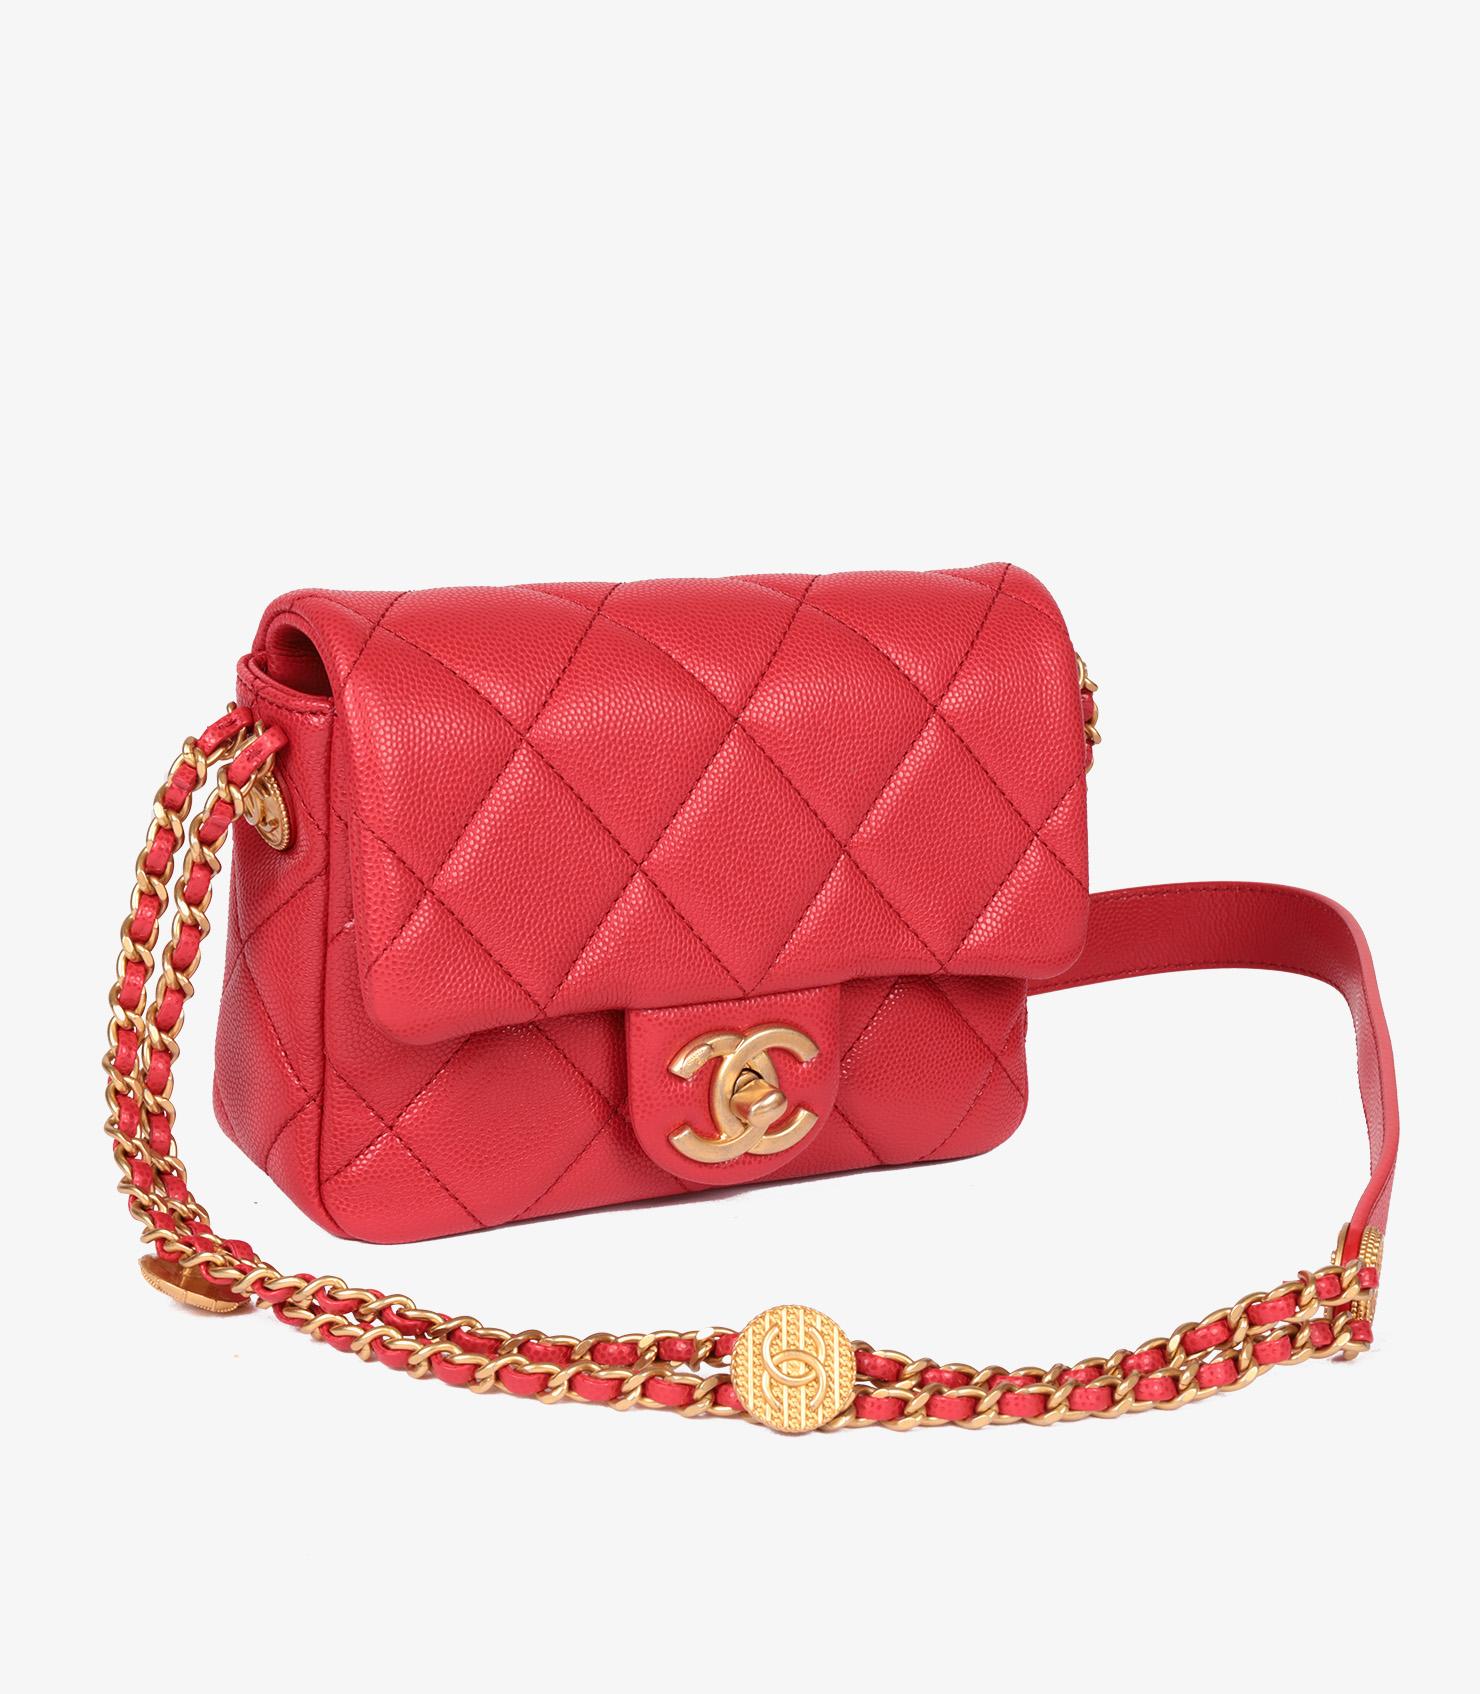 Chanel Red Quilted Shiny Caviar Leather Medallion Square Mini Flap Bag In Excellent Condition For Sale In Bishop's Stortford, Hertfordshire